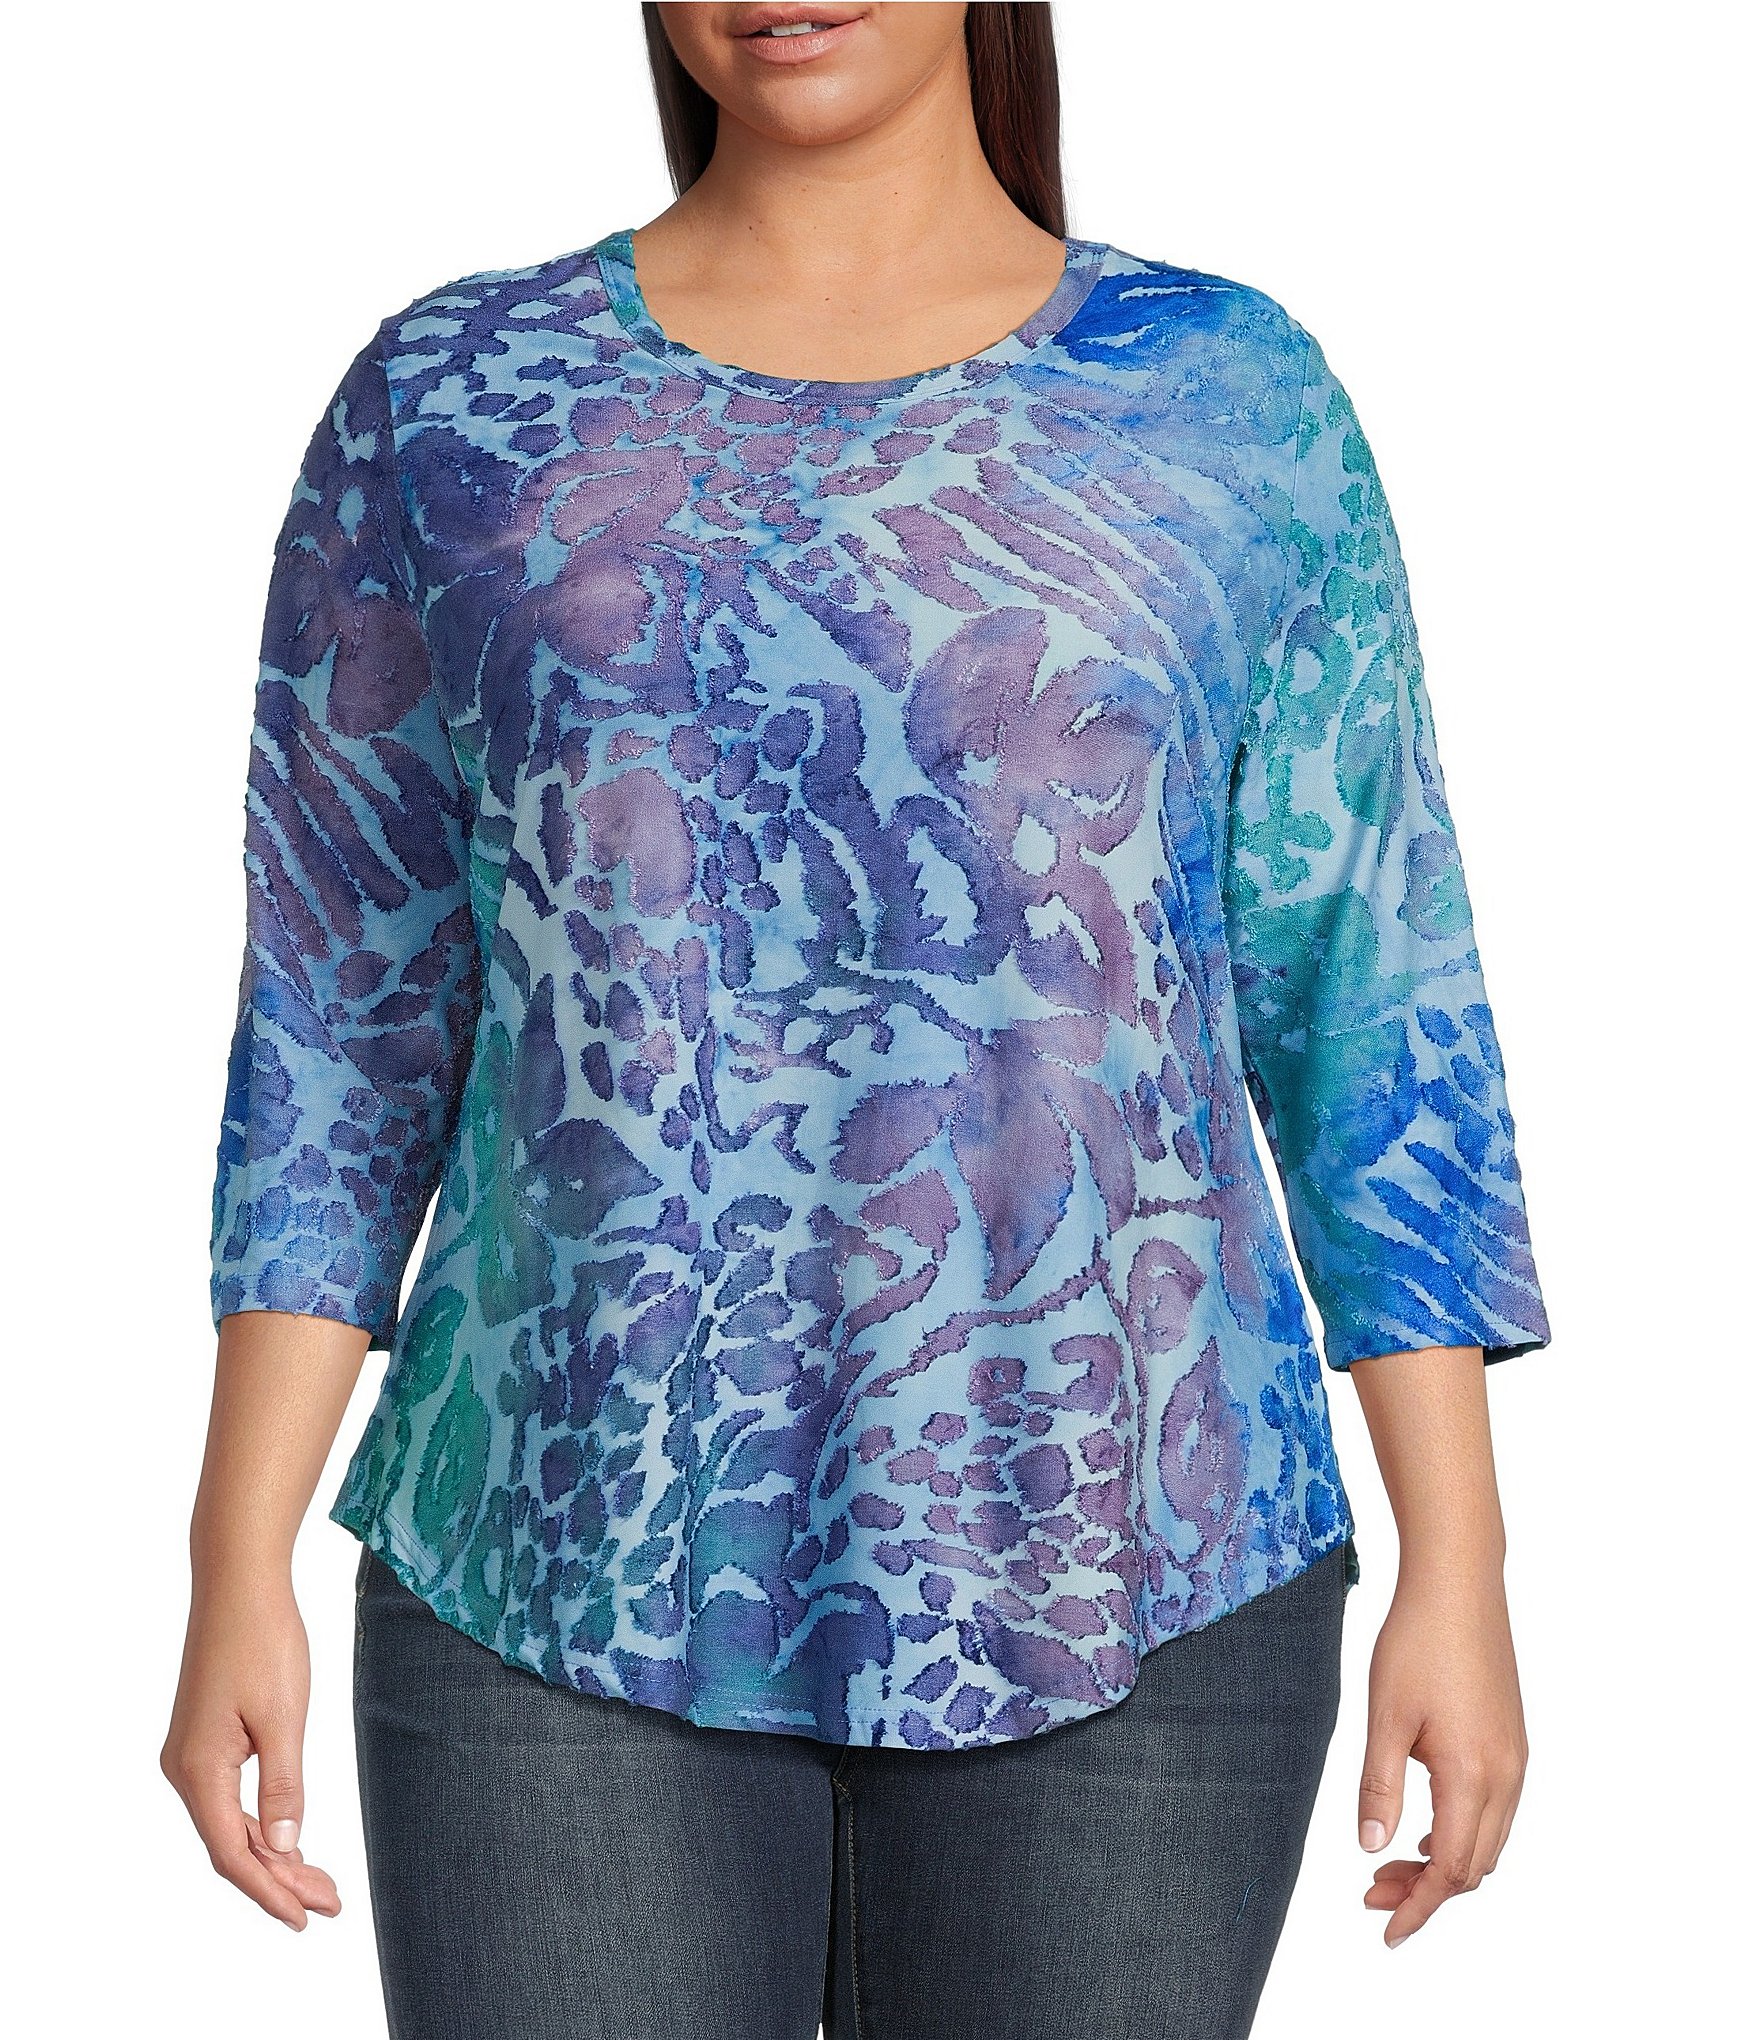 Calessa Plus Size Burnout Abstract Paisley Tie Dye Print 3/4 Sleeve ...